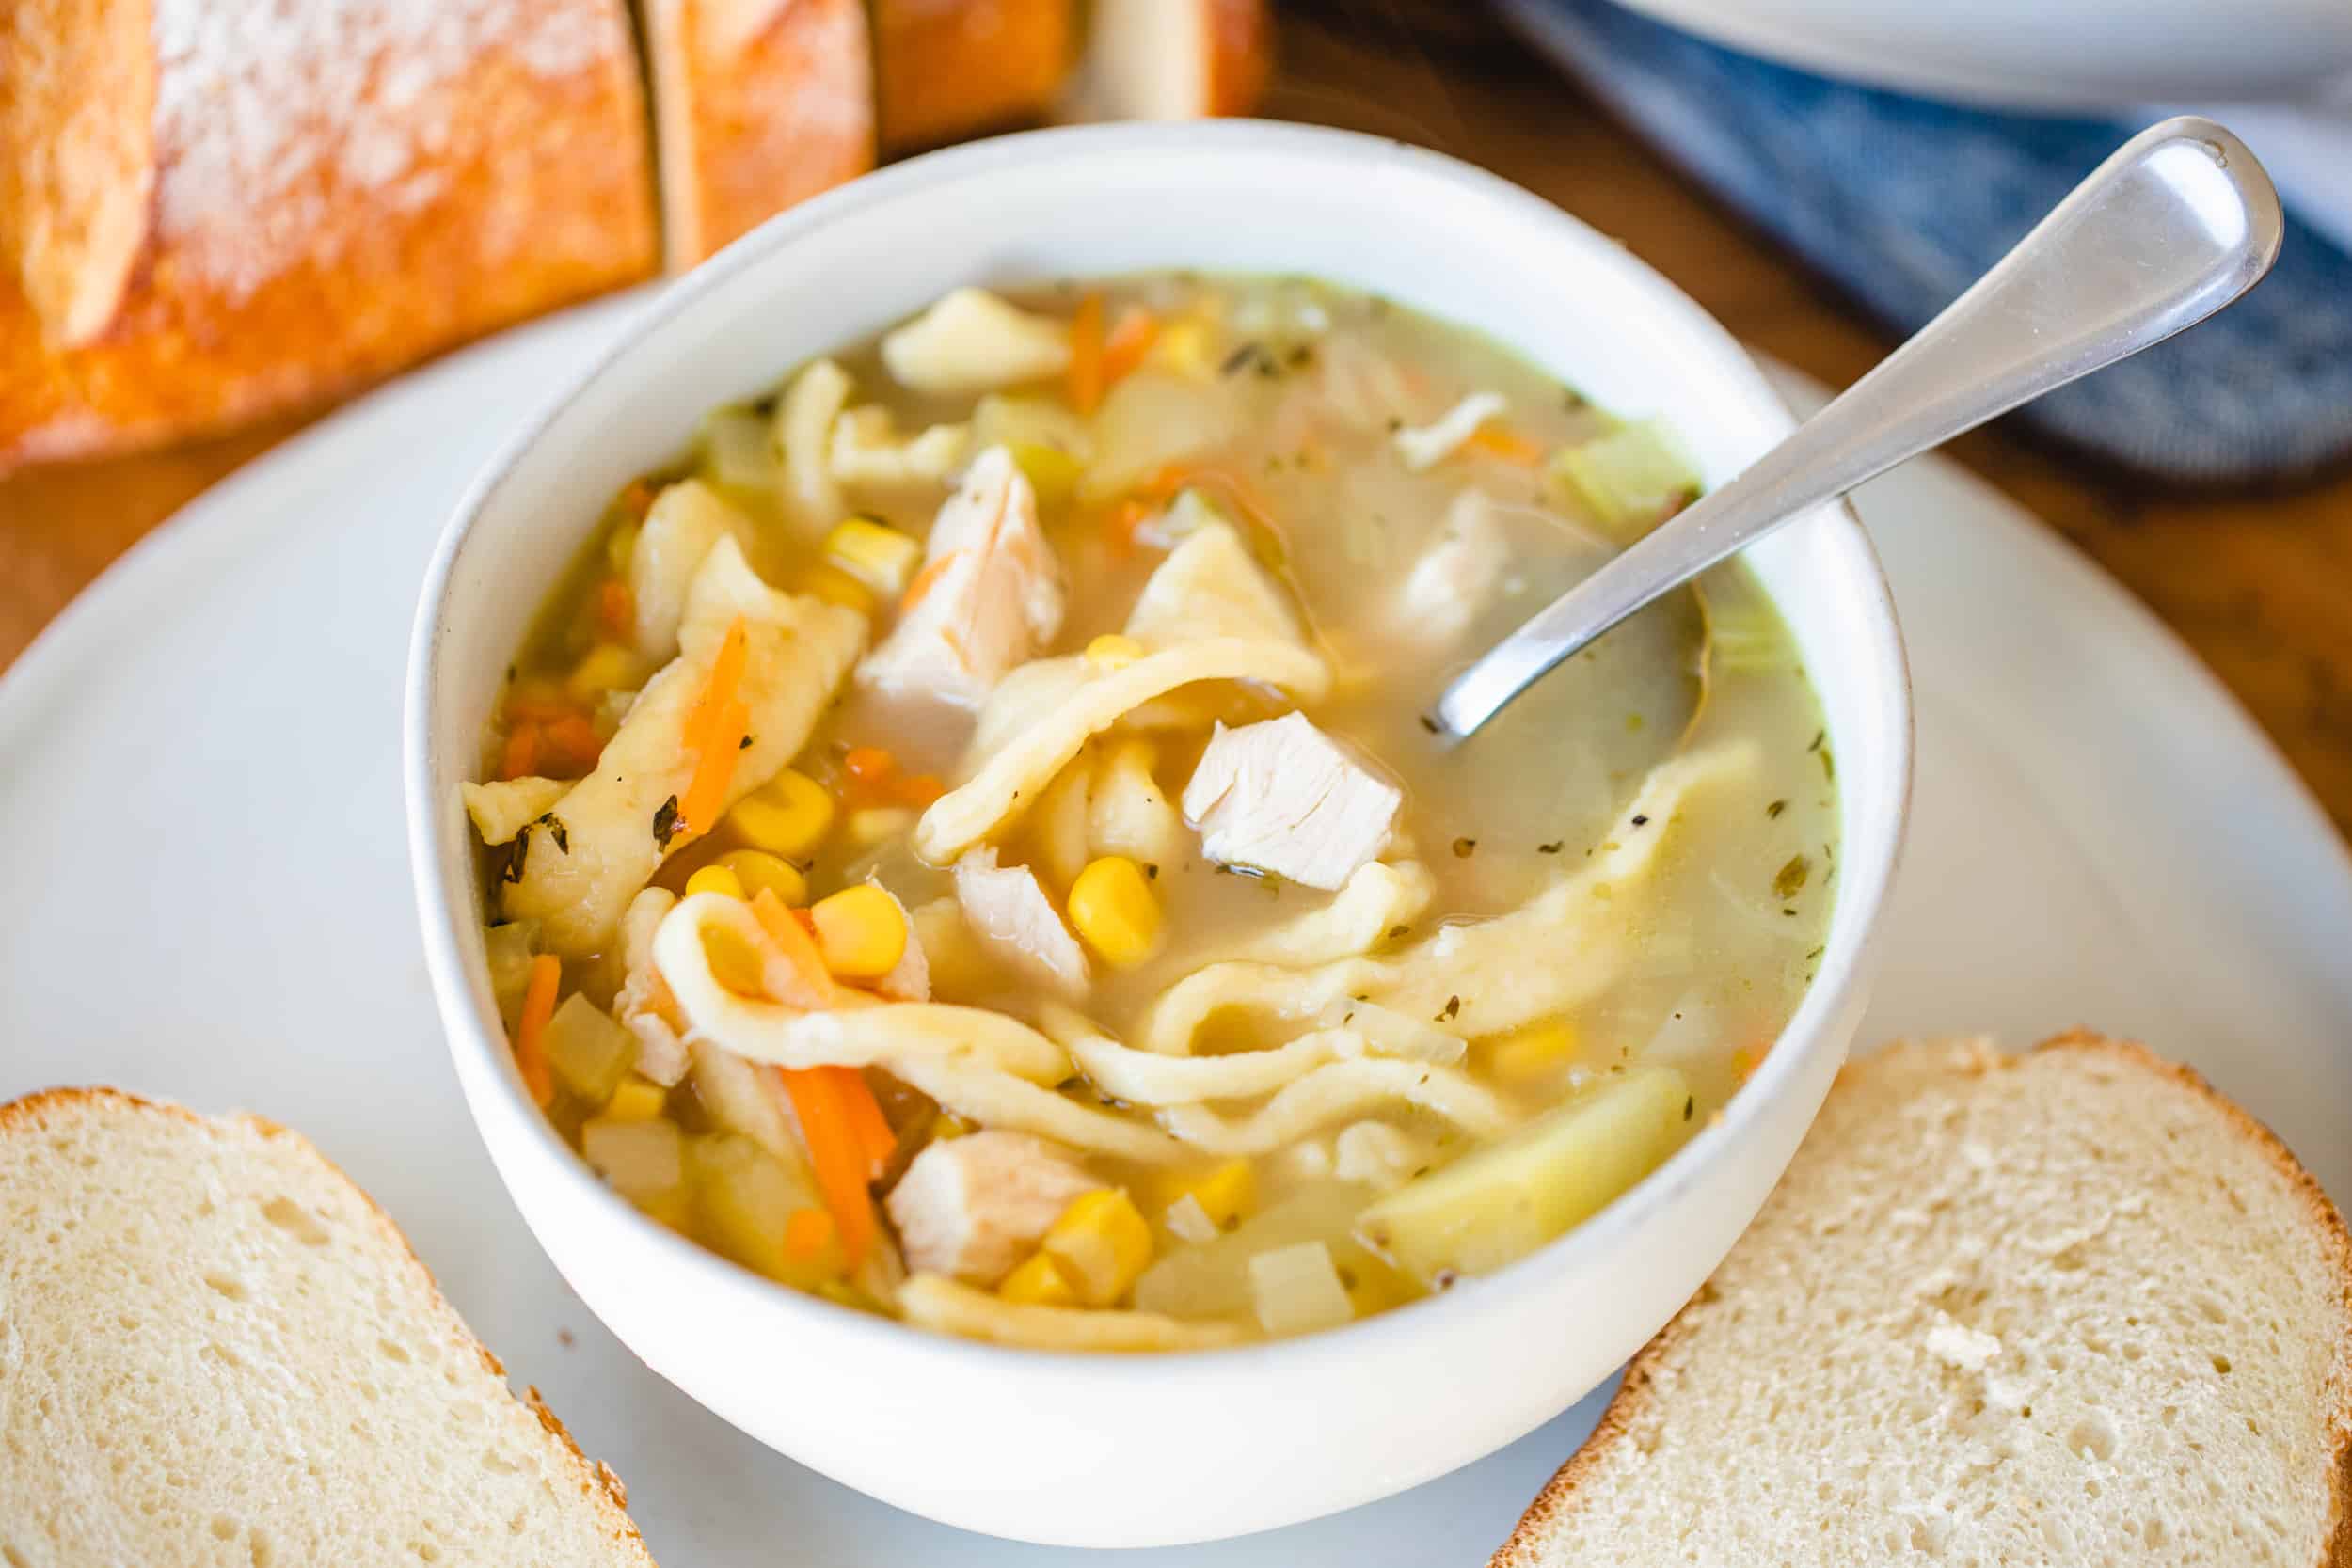 Bowl and spoon of chicken noodle soup sit beside sliced bread.